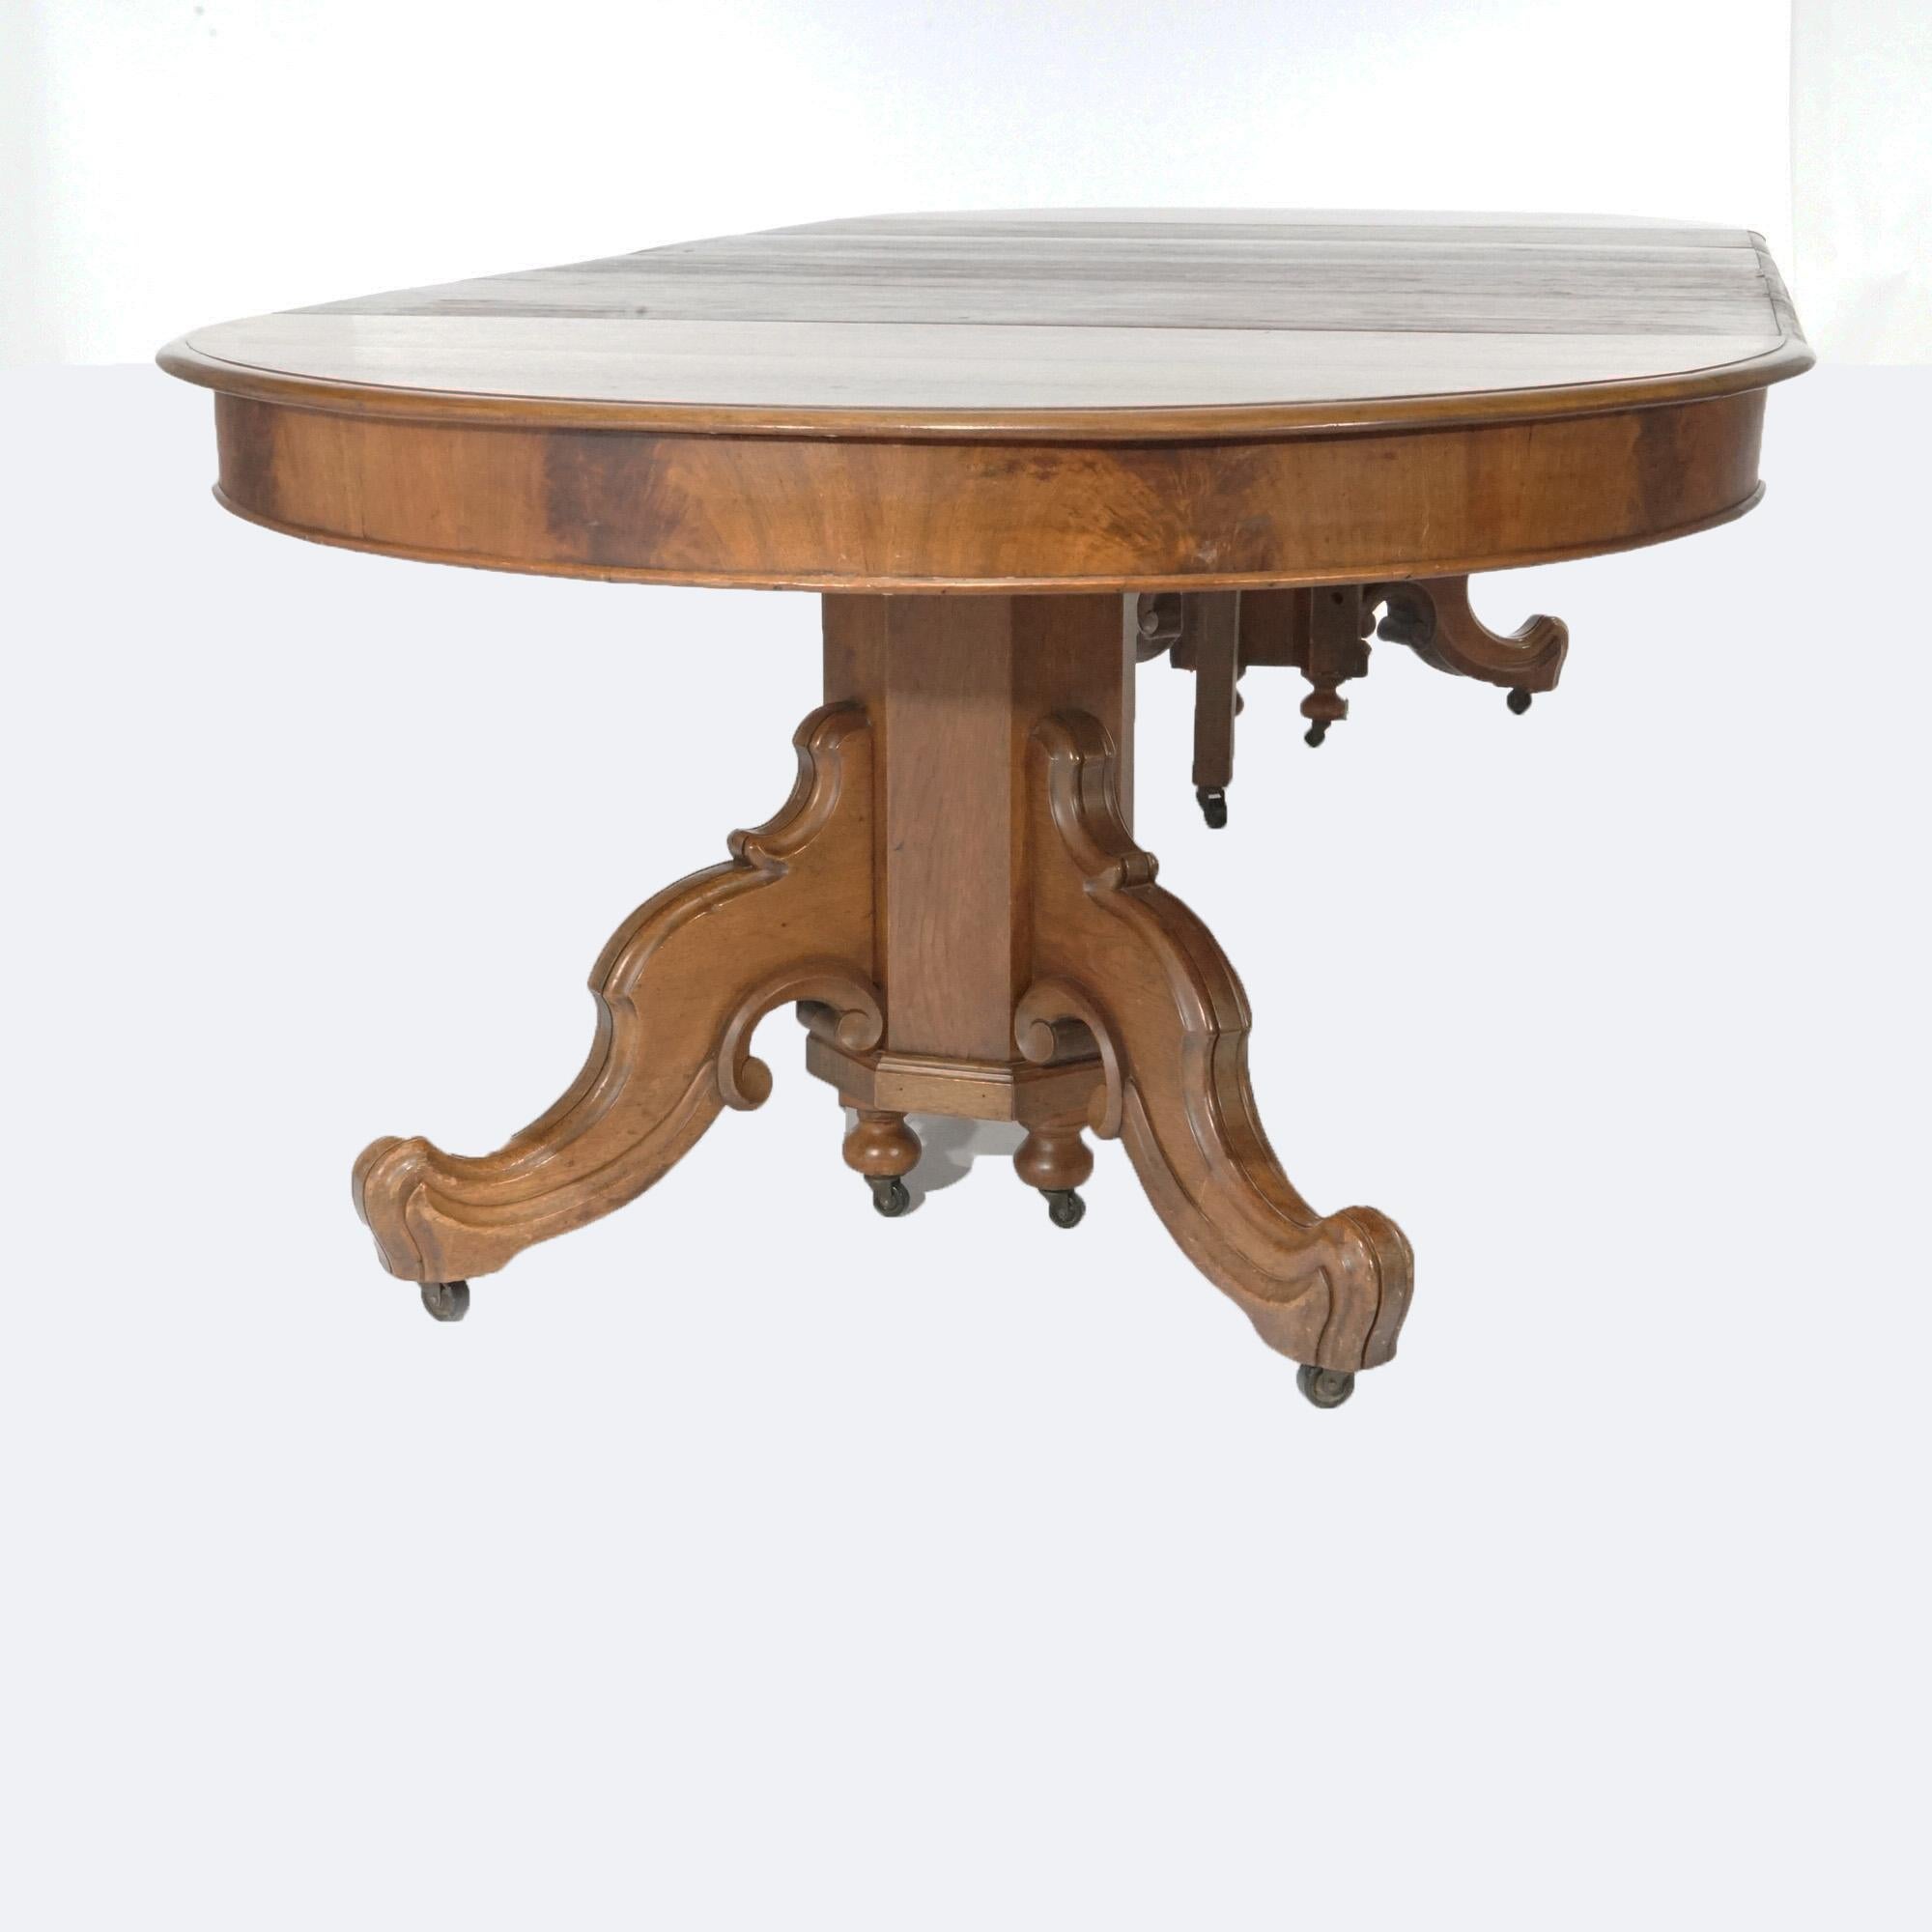 19th Century Antique Victorian Walnut Extension Split-Pedestal Dining Table with Leaves C1890